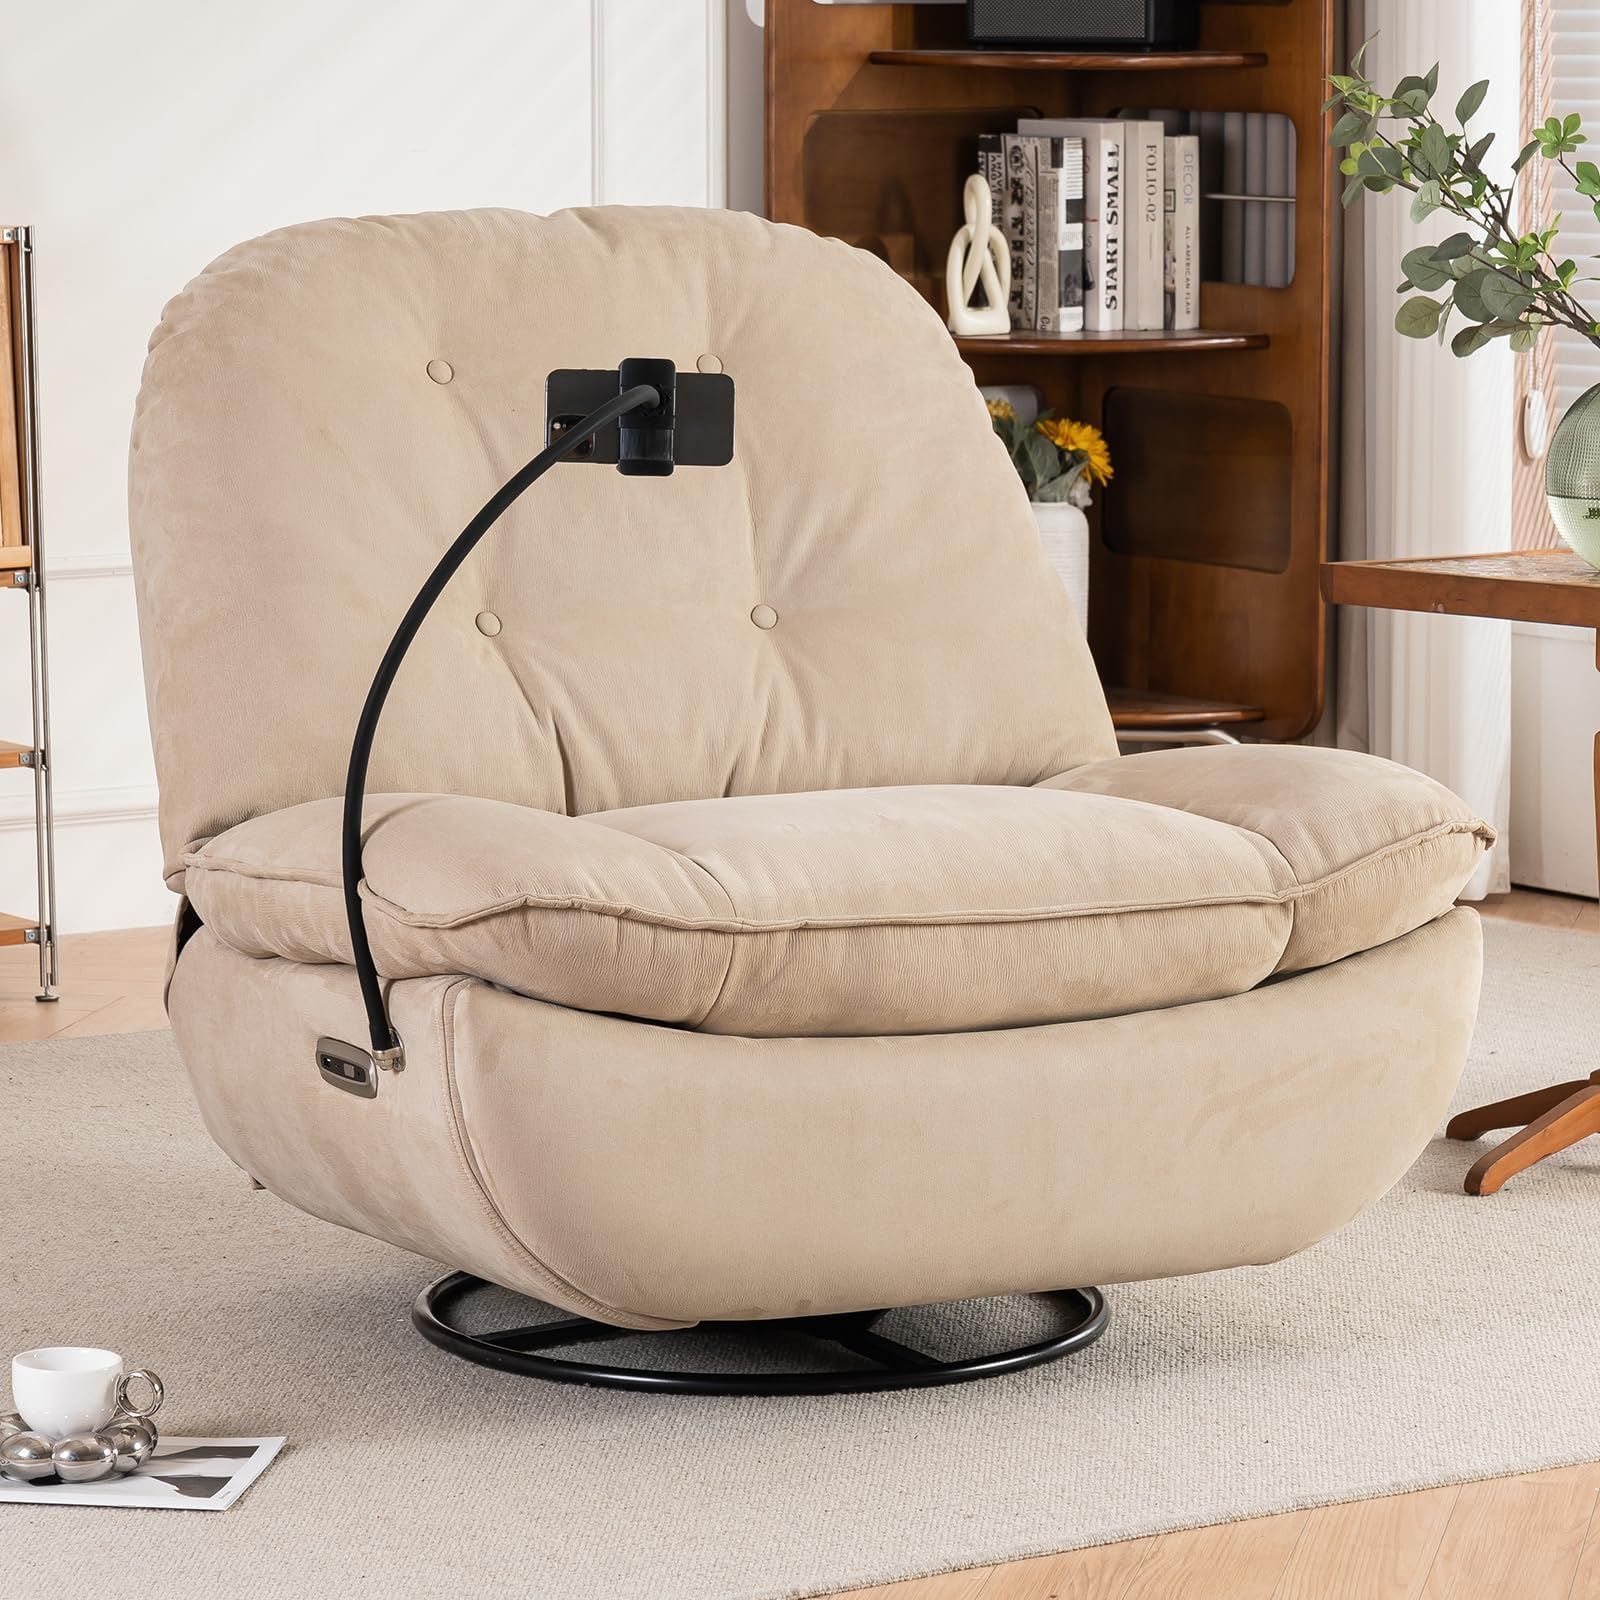 The luxurious effect created by the
  glider recliners